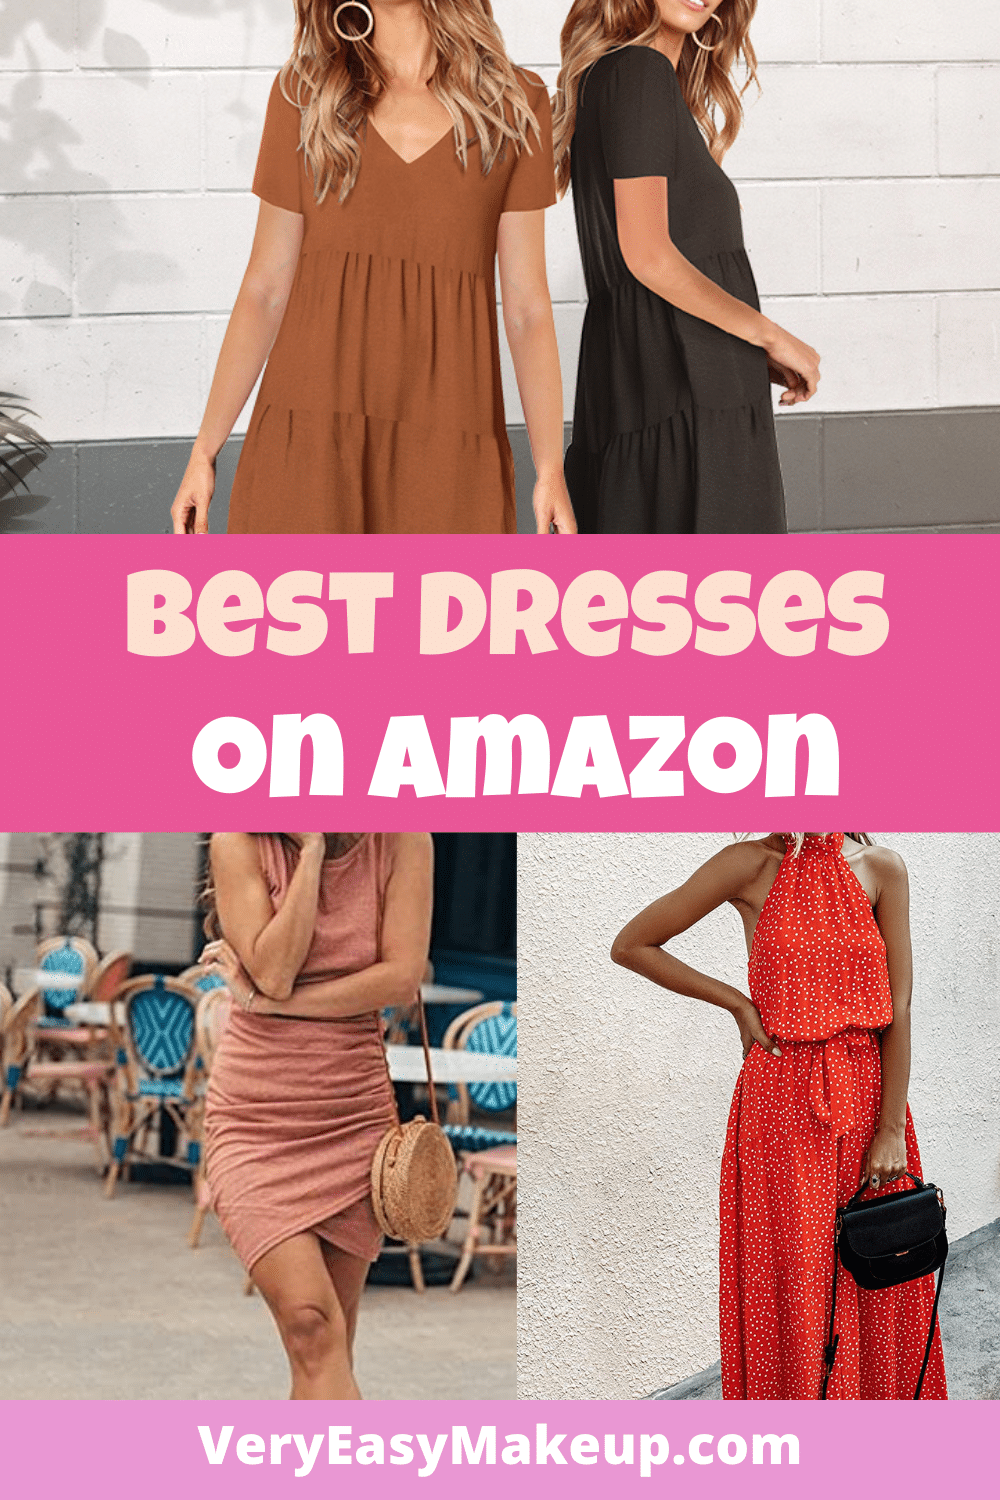 The Best Dresses on Amazon 2021 by Very Easy Makeup